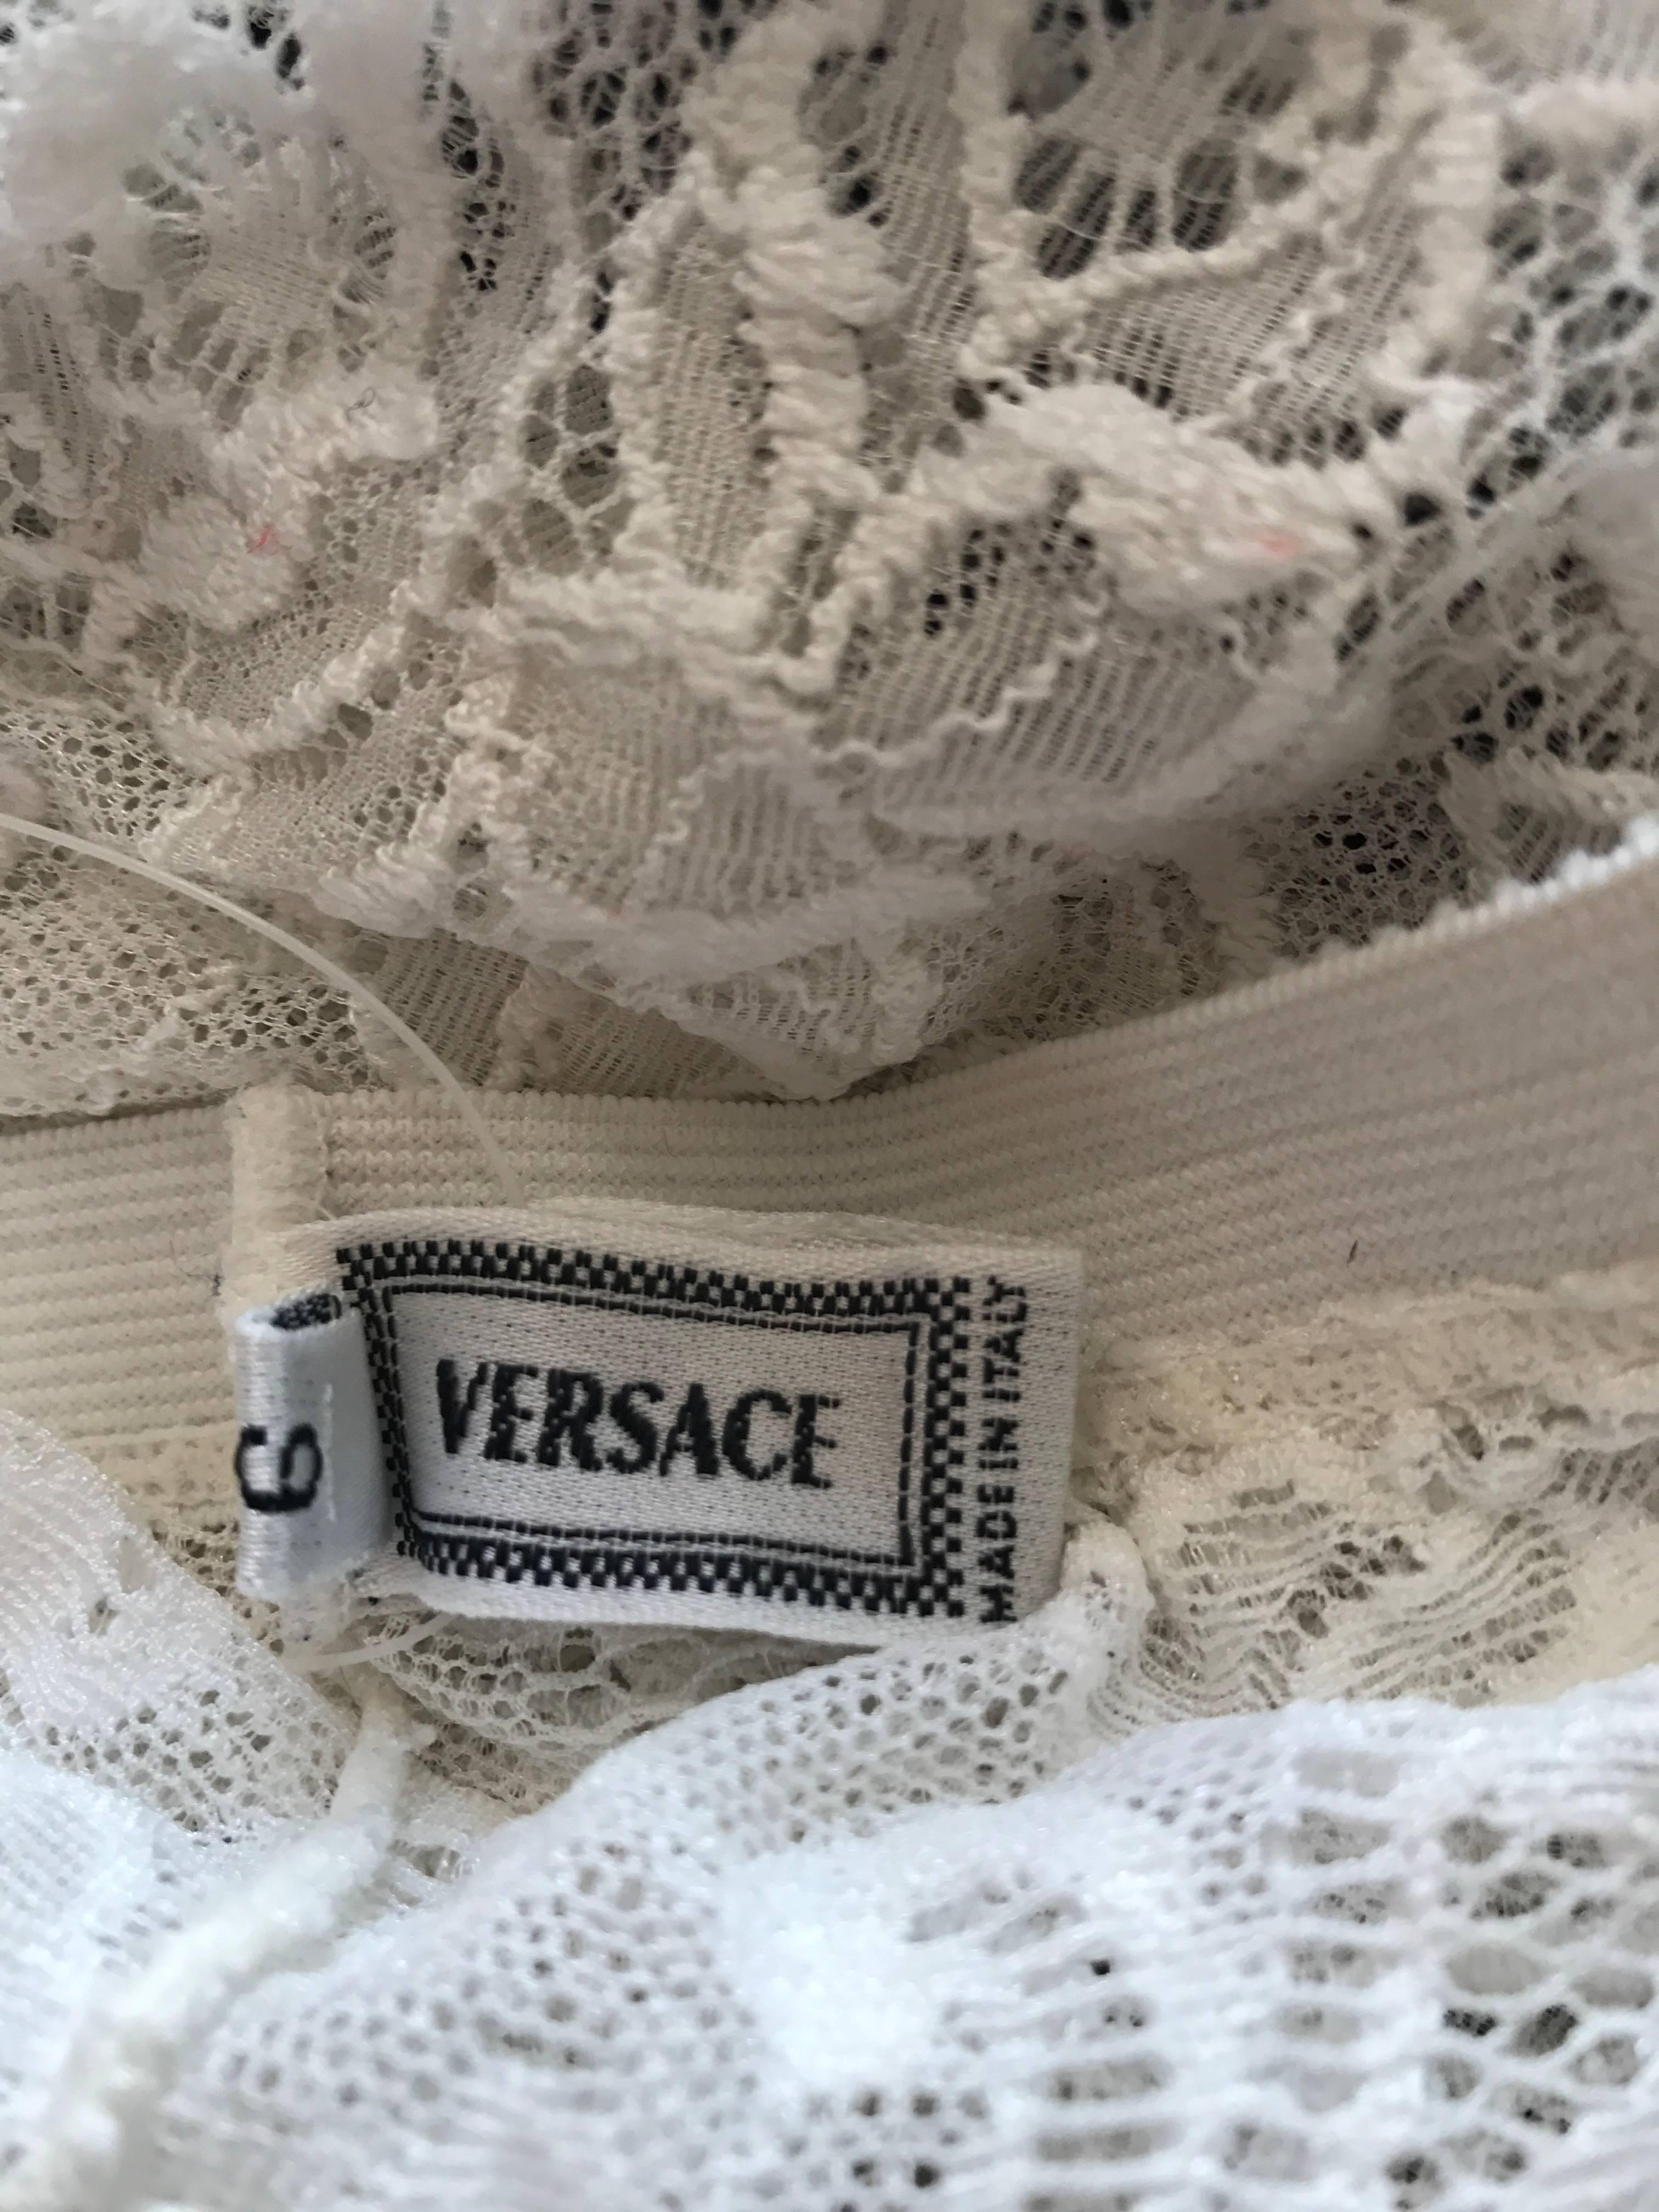 Women's 1990s New Gianni Versace Couture Rare 90s Vintage White Lace Leggings / Tights 